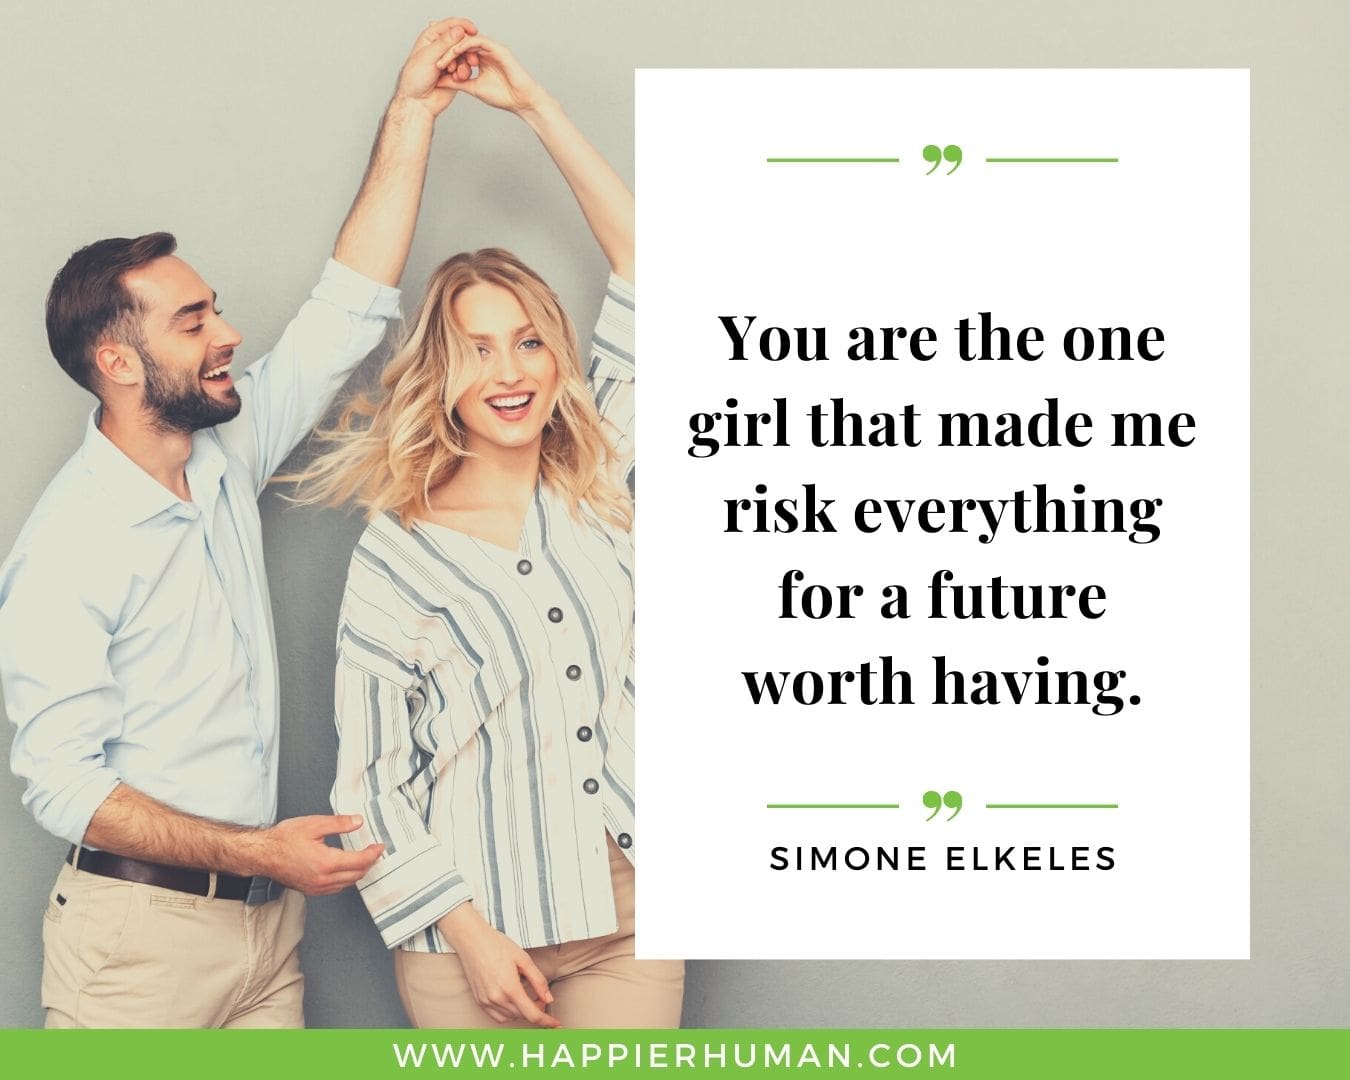 Romantic Deep Love Quotes - “You are the one girl that made me risk everything for a future worth having.” – Simone Elkeles